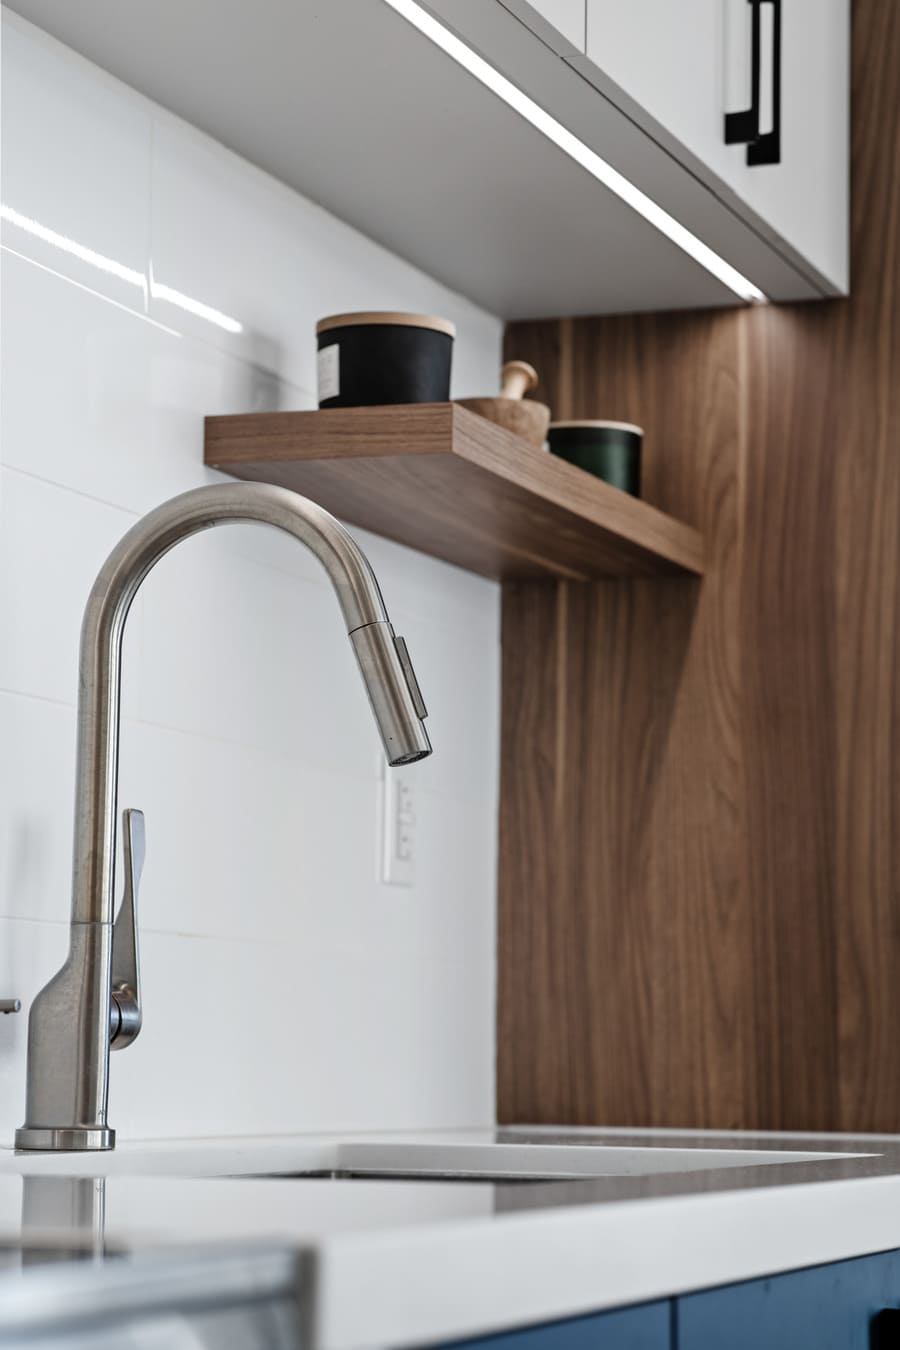 Stainless steel sink faucet in GTA condo kitchen renovation with task lighting and built-in shelving